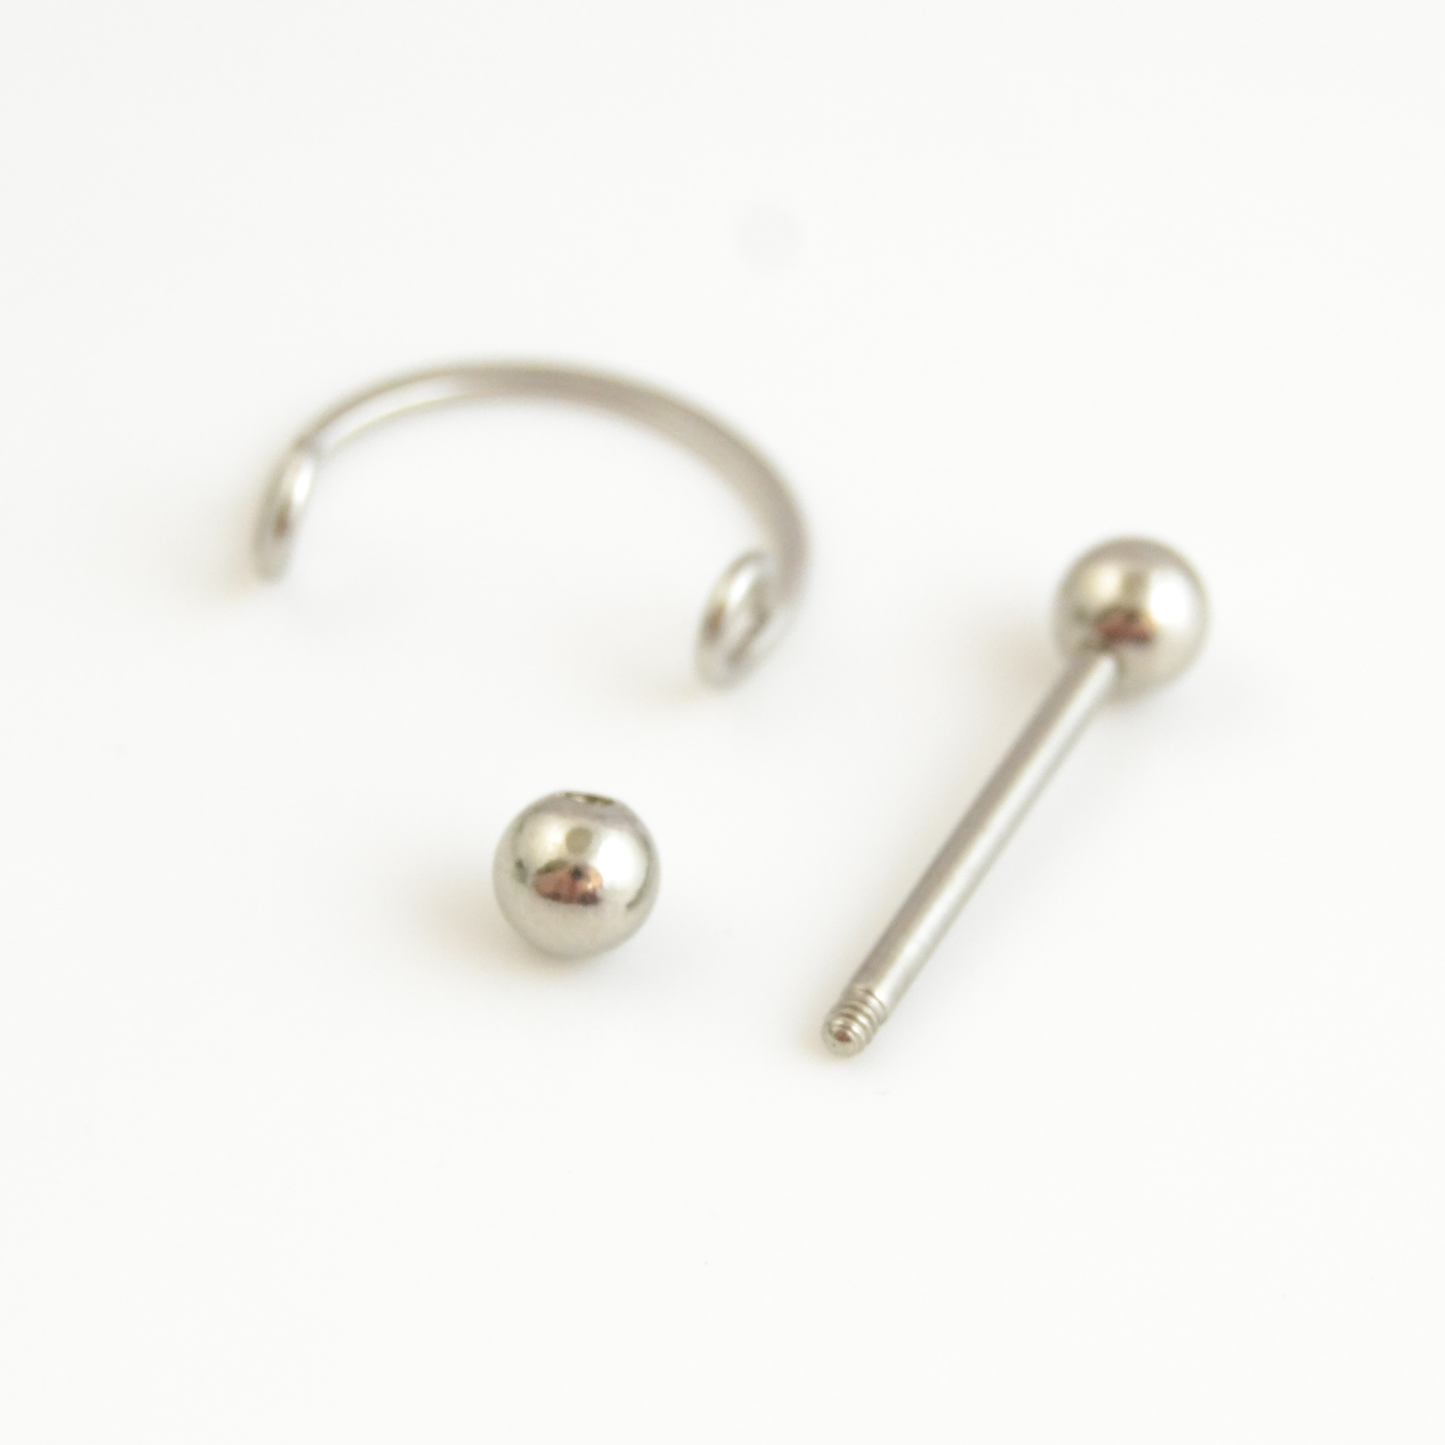 Smooth Chic 316L Stainless Steel 14ga Nipple Ring